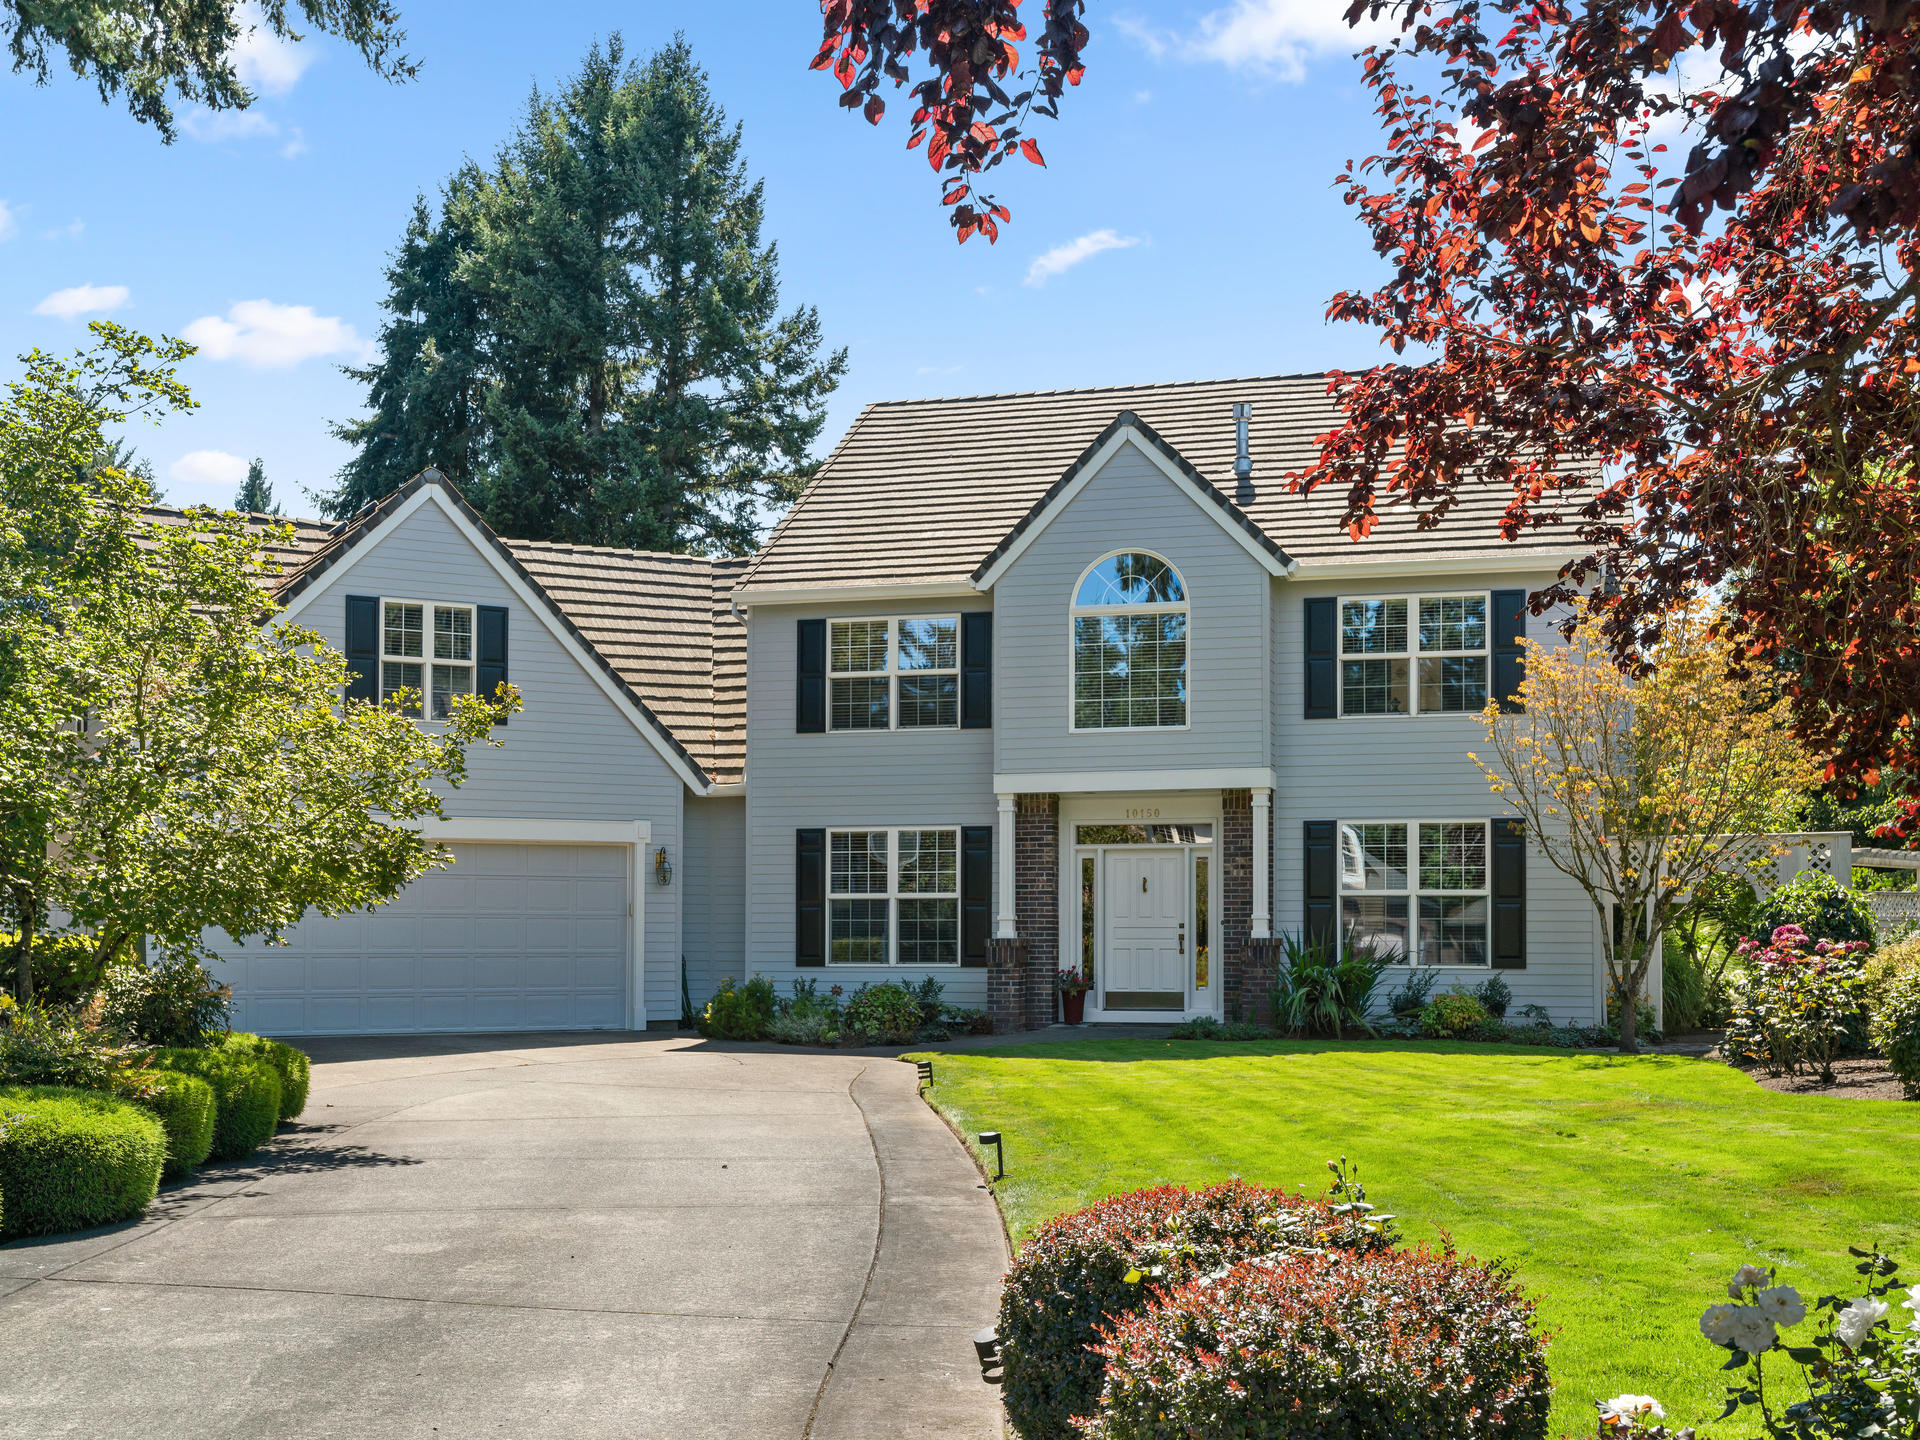 Exterior Traditional home in Tualatin with green grass and driveway up to garage